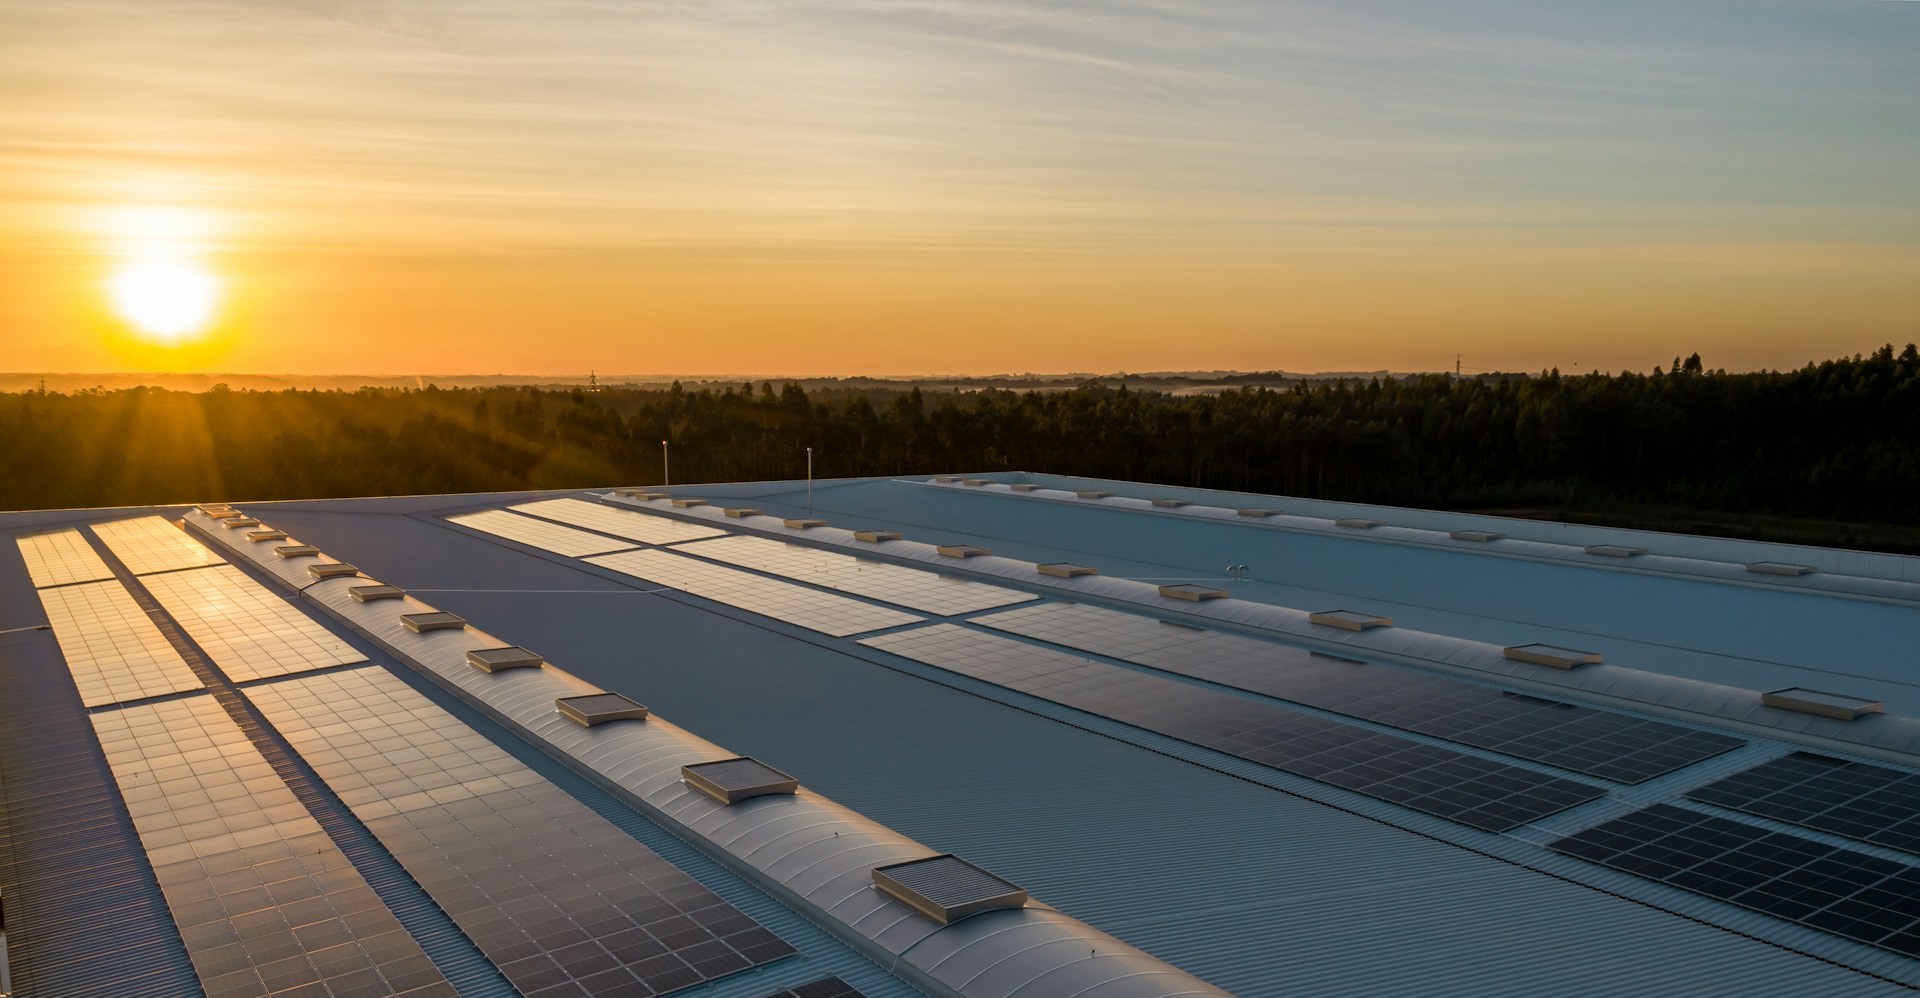 The sun sets over solar panels on a building rooftop